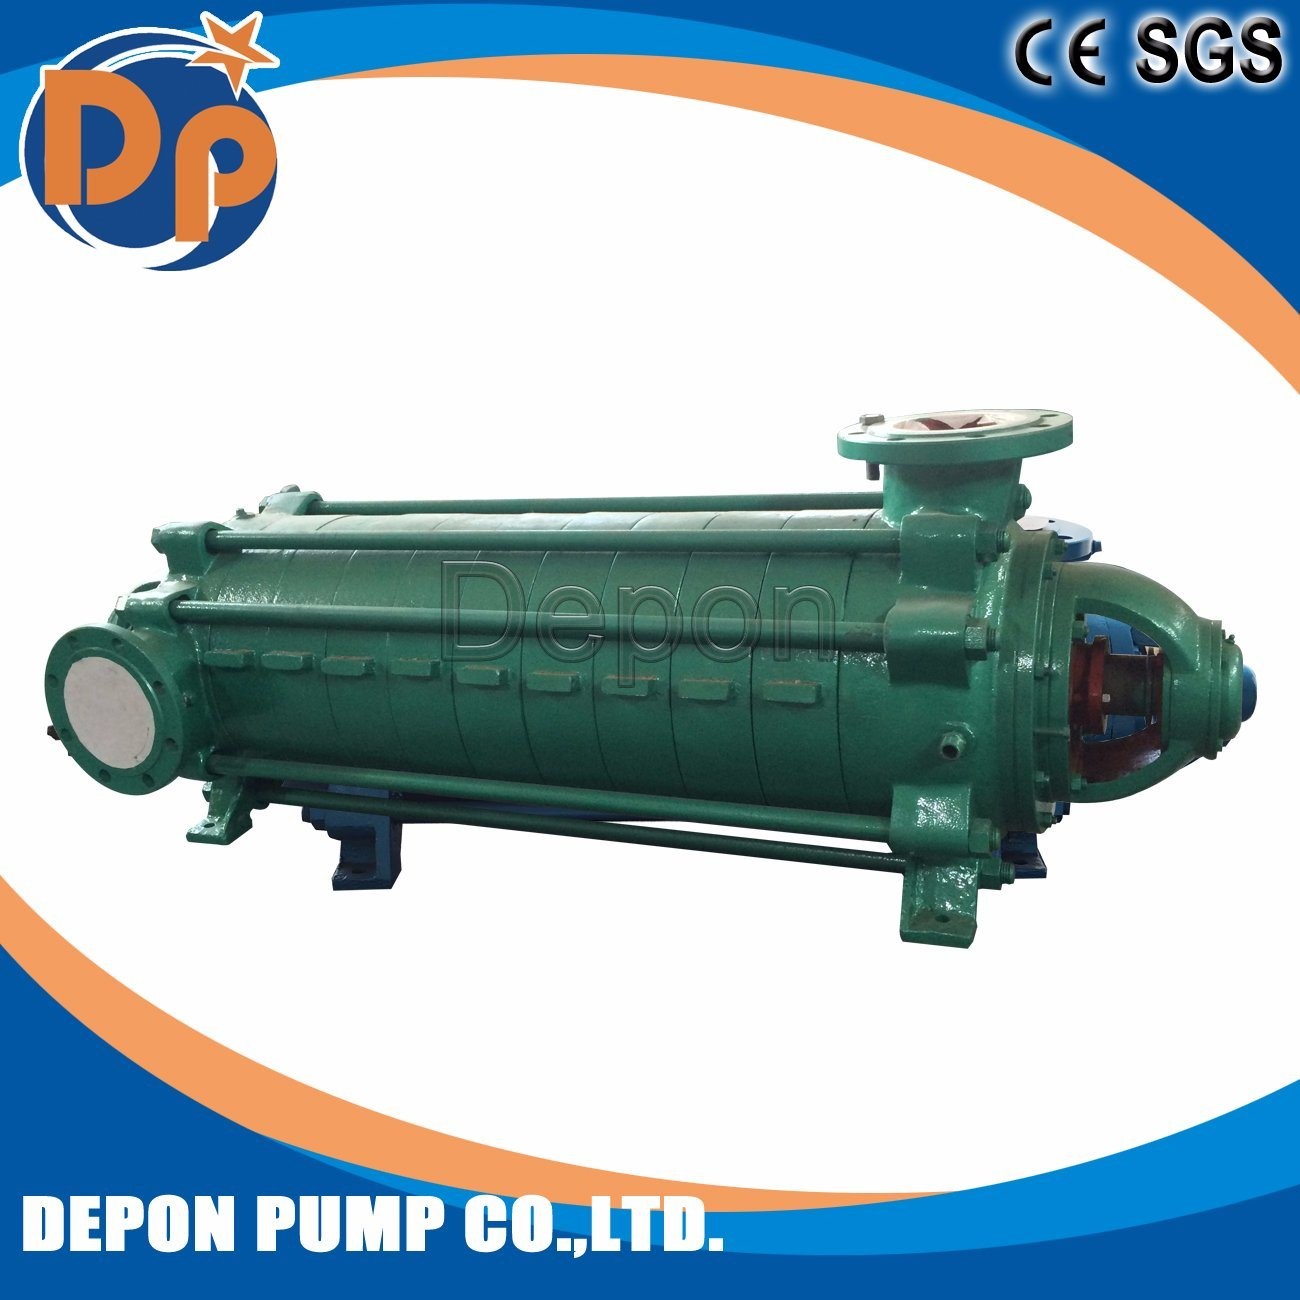 High Drainage Flow Horizontal Multistage Centrifugal Pump for Boiler Feed